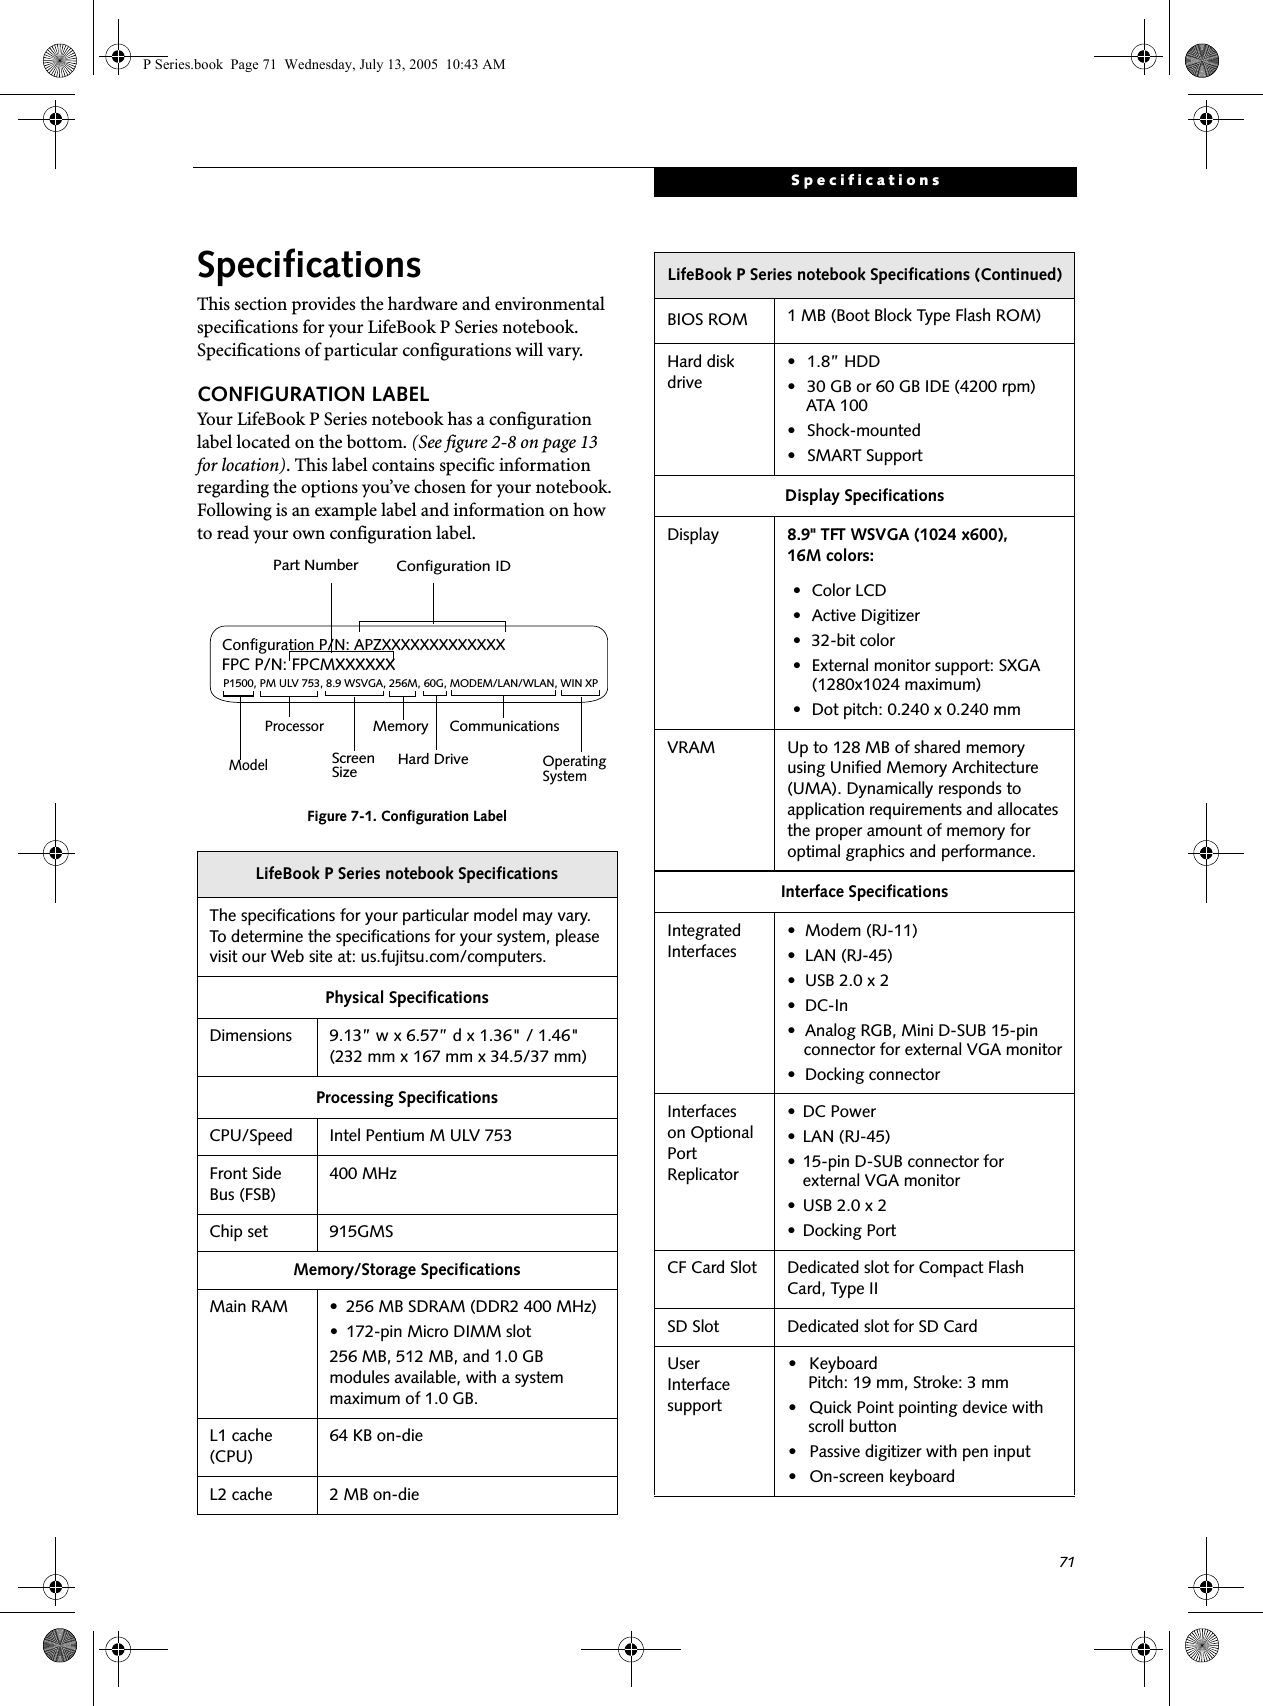 71SpecificationsSpecificationsThis section provides the hardware and environmental specifications for your LifeBook P Series notebook. Specifications of particular configurations will vary.CONFIGURATION LABELYour LifeBook P Series notebook has a configuration label located on the bottom. (See figure 2-8 on page 13 for location). This label contains specific information regarding the options you’ve chosen for your notebook. Following is an example label and information on how to read your own configuration label.Figure 7-1. Configuration LabelLifeBook P Series notebook SpecificationsThe specifications for your particular model may vary. To determine the specifications for your system, please visit our Web site at: us.fujitsu.com/computers.Physical SpecificationsDimensions 9.13” w x 6.57” d x 1.36&quot; / 1.46&quot; (232 mm x 167 mm x 34.5/37 mm)Processing SpecificationsCPU/Speed Intel Pentium M ULV 753Front Side Bus (FSB)400 MHzChip set 915GMSMemory/Storage SpecificationsMain RAM • 256 MB SDRAM (DDR2 400 MHz)• 172-pin Micro DIMM slot256 MB, 512 MB, and 1.0 GB modules available, with a system maximum of 1.0 GB.L1 cache (CPU)64 KB on-die L2 cache 2 MB on-die P1500, PM ULV 753, 8.9 WSVGA, 256M, 60G, MODEM/LAN/WLAN, WIN XPConfiguration P/N: APZXXXXXXXXXXXXXFPC P/N: FPCMXXXXXXModelProcessorScreenSizeOperatingSystemHard Drive Part NumberConfiguration IDMemory CommunicationsBIOS ROM 1 MB (Boot Block Type Flash ROM)Hard disk drive• 1.8” HDD• 30 GB or 60 GB IDE (4200 rpm)ATA 100• Shock-mounted• SMART SupportDisplay SpecificationsDisplay 8.9&quot; TFT WSVGA (1024 x600), 16M colors:• Color LCD• Active Digitizer• 32-bit color• External monitor support: SXGA (1280x1024 maximum)• Dot pitch: 0.240 x 0.240 mmVRAM Up to 128 MB of shared memory using Unified Memory Architecture (UMA). Dynamically responds to application requirements and allocates the proper amount of memory for optimal graphics and performance. Interface SpecificationsIntegrated Interfaces• Modem (RJ-11)• LAN (RJ-45)• USB 2.0 x 2•DC-In• Analog RGB, Mini D-SUB 15-pin connector for external VGA monitor• Docking connectorInterfaceson Optional Port Replicator • DC Power• LAN (RJ-45)• 15-pin D-SUB connector for external VGA monitor• USB 2.0 x 2• Docking PortCF Card Slot Dedicated slot for Compact Flash Card, Type IISD Slot Dedicated slot for SD CardUser Interface support• Keyboard Pitch: 19 mm, Stroke: 3 mm• Quick Point pointing device with scroll button• Passive digitizer with pen input• On-screen keyboardLifeBook P Series notebook Specifications (Continued)P Series.book  Page 71  Wednesday, July 13, 2005  10:43 AM